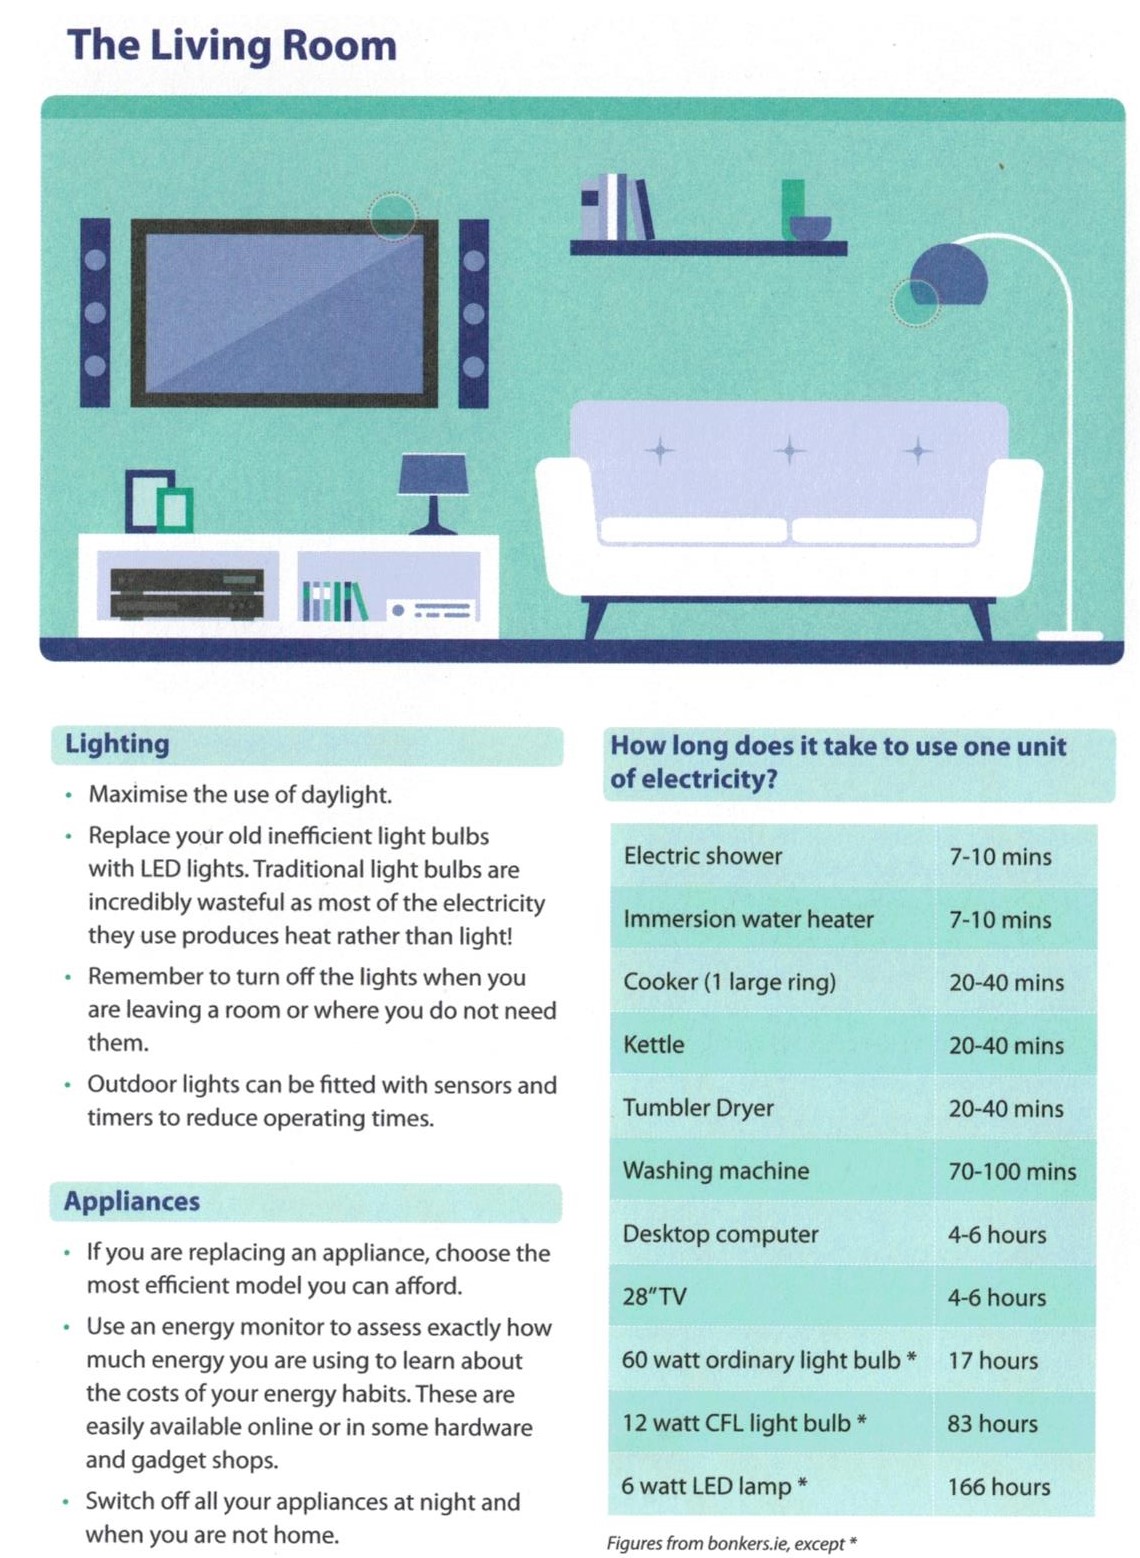 tips to save energy in the living room